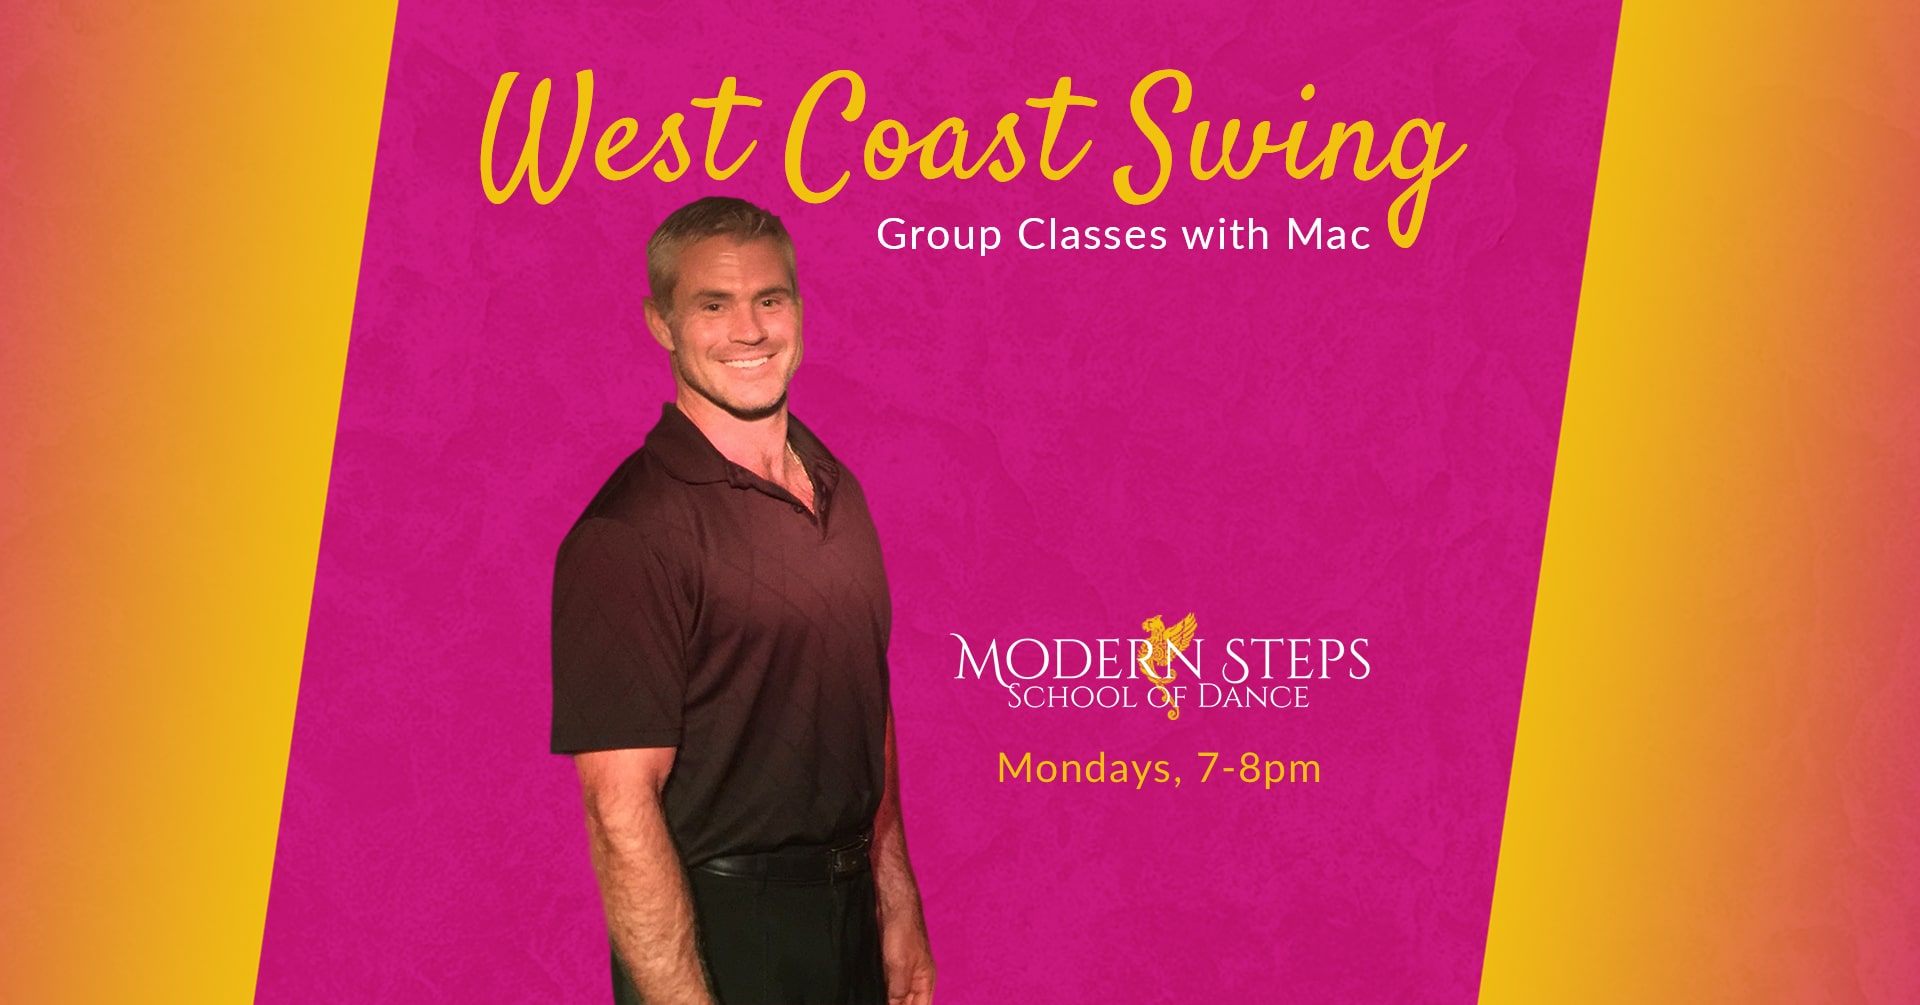 Modern Steps School of Dance Naples Florida West Coast Swing Dance Classes - Group Ballroom Dance Lessons - Naples Florida Things to Do